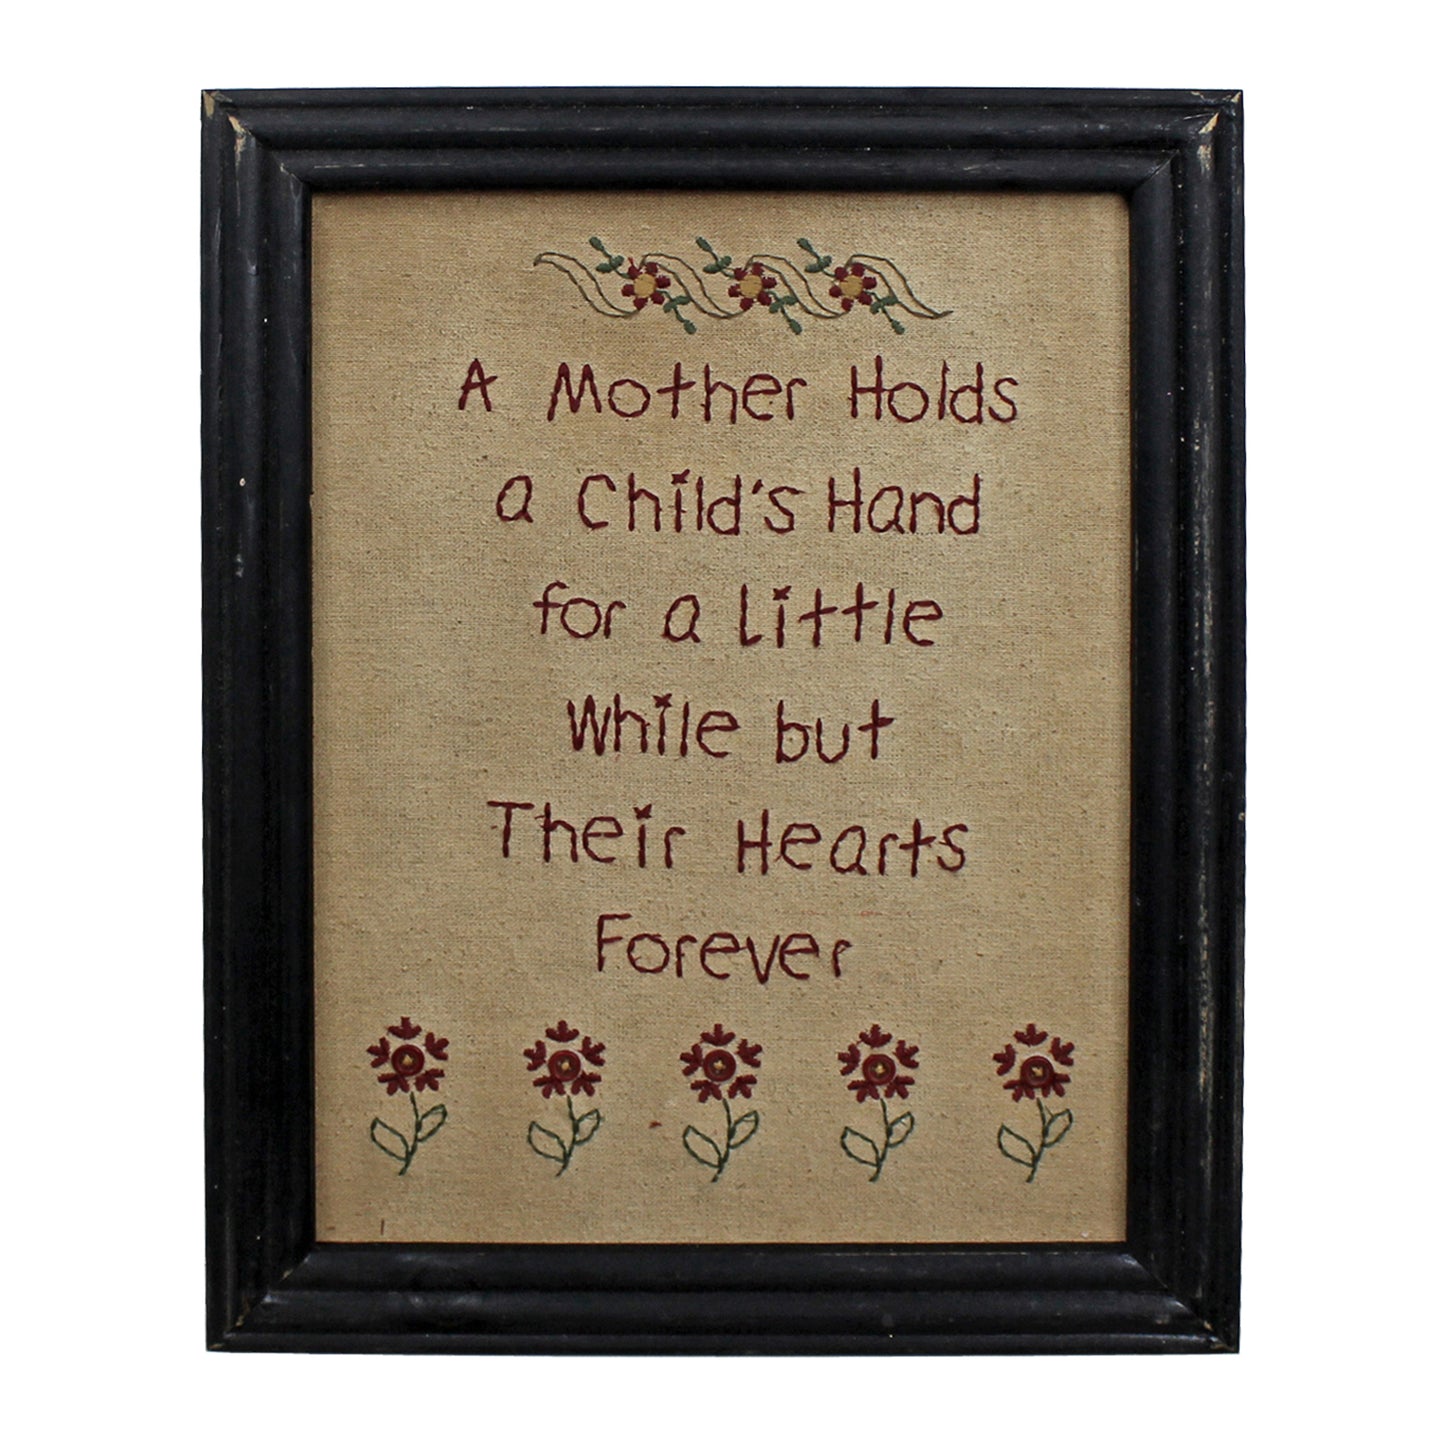 CVHOMEDECO. Primitives Antique A Mother Holds a Child's Hand for a Little While but Their Hearts Forever Stitchery Frame Wall Mounted Hanging Decor Art, 11 x 14 Inch